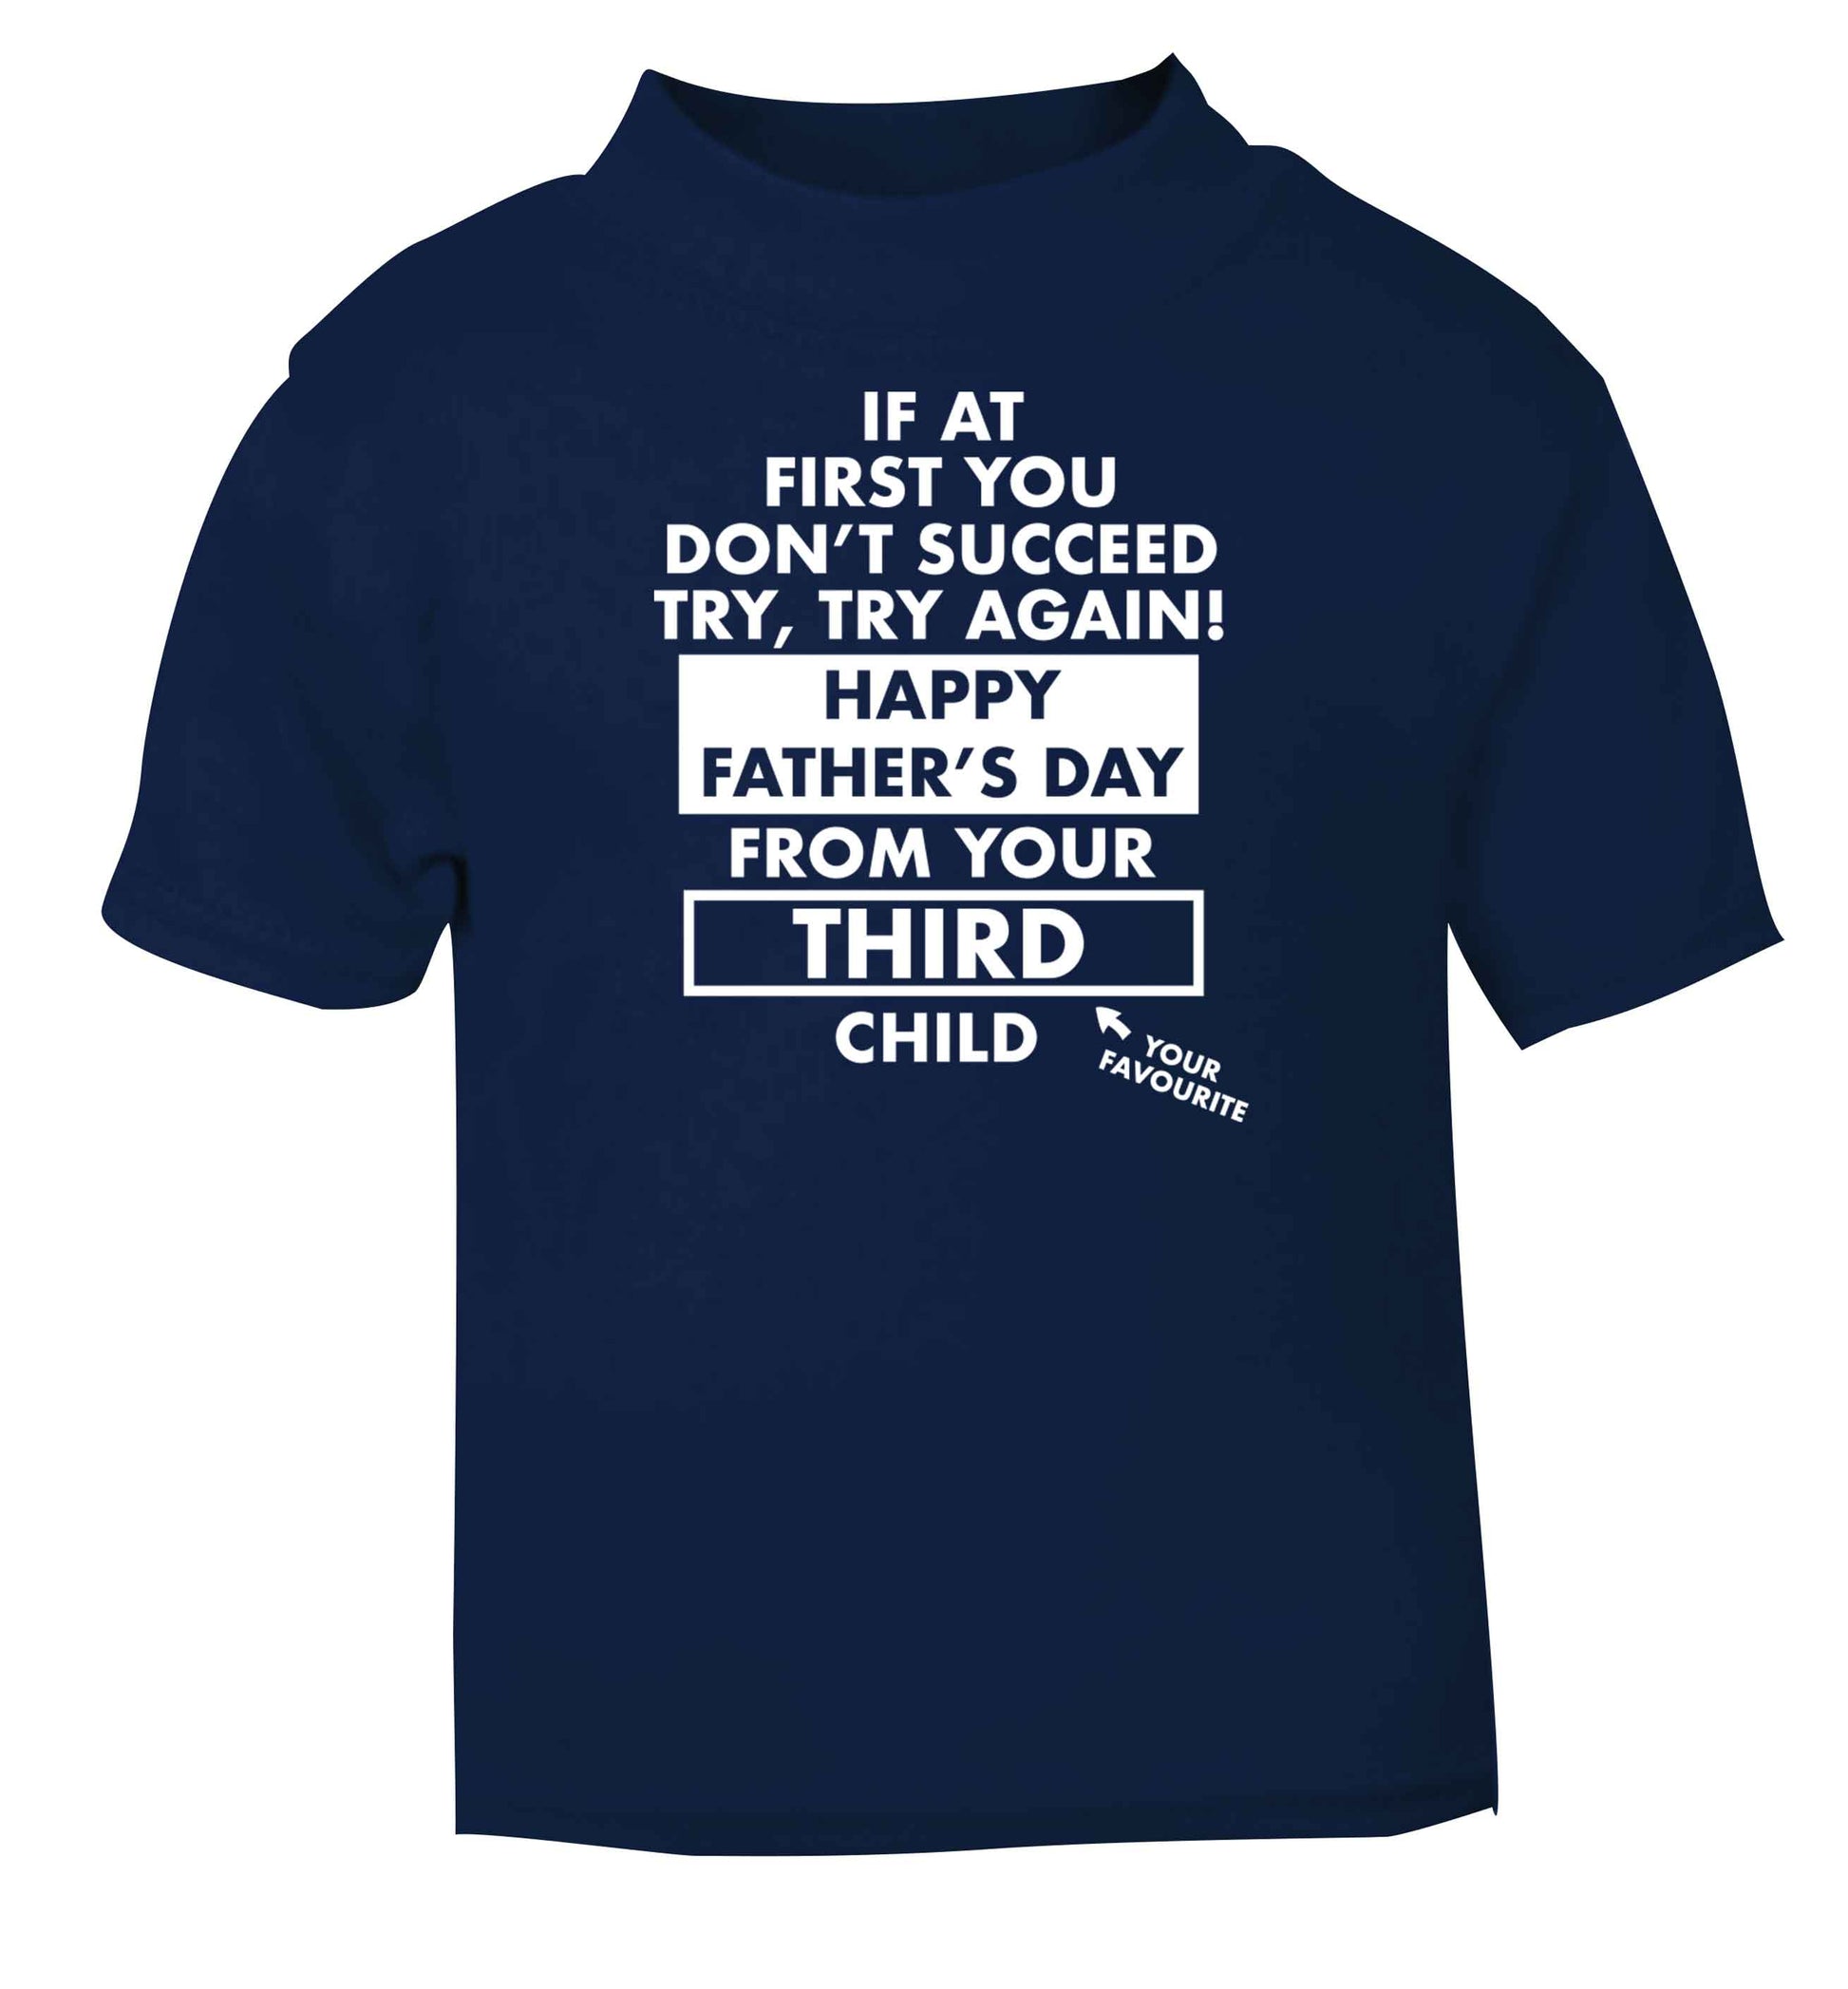 If at first you don't succeed try, try again Happy Father's day from your third child! navy baby toddler Tshirt 2 Years